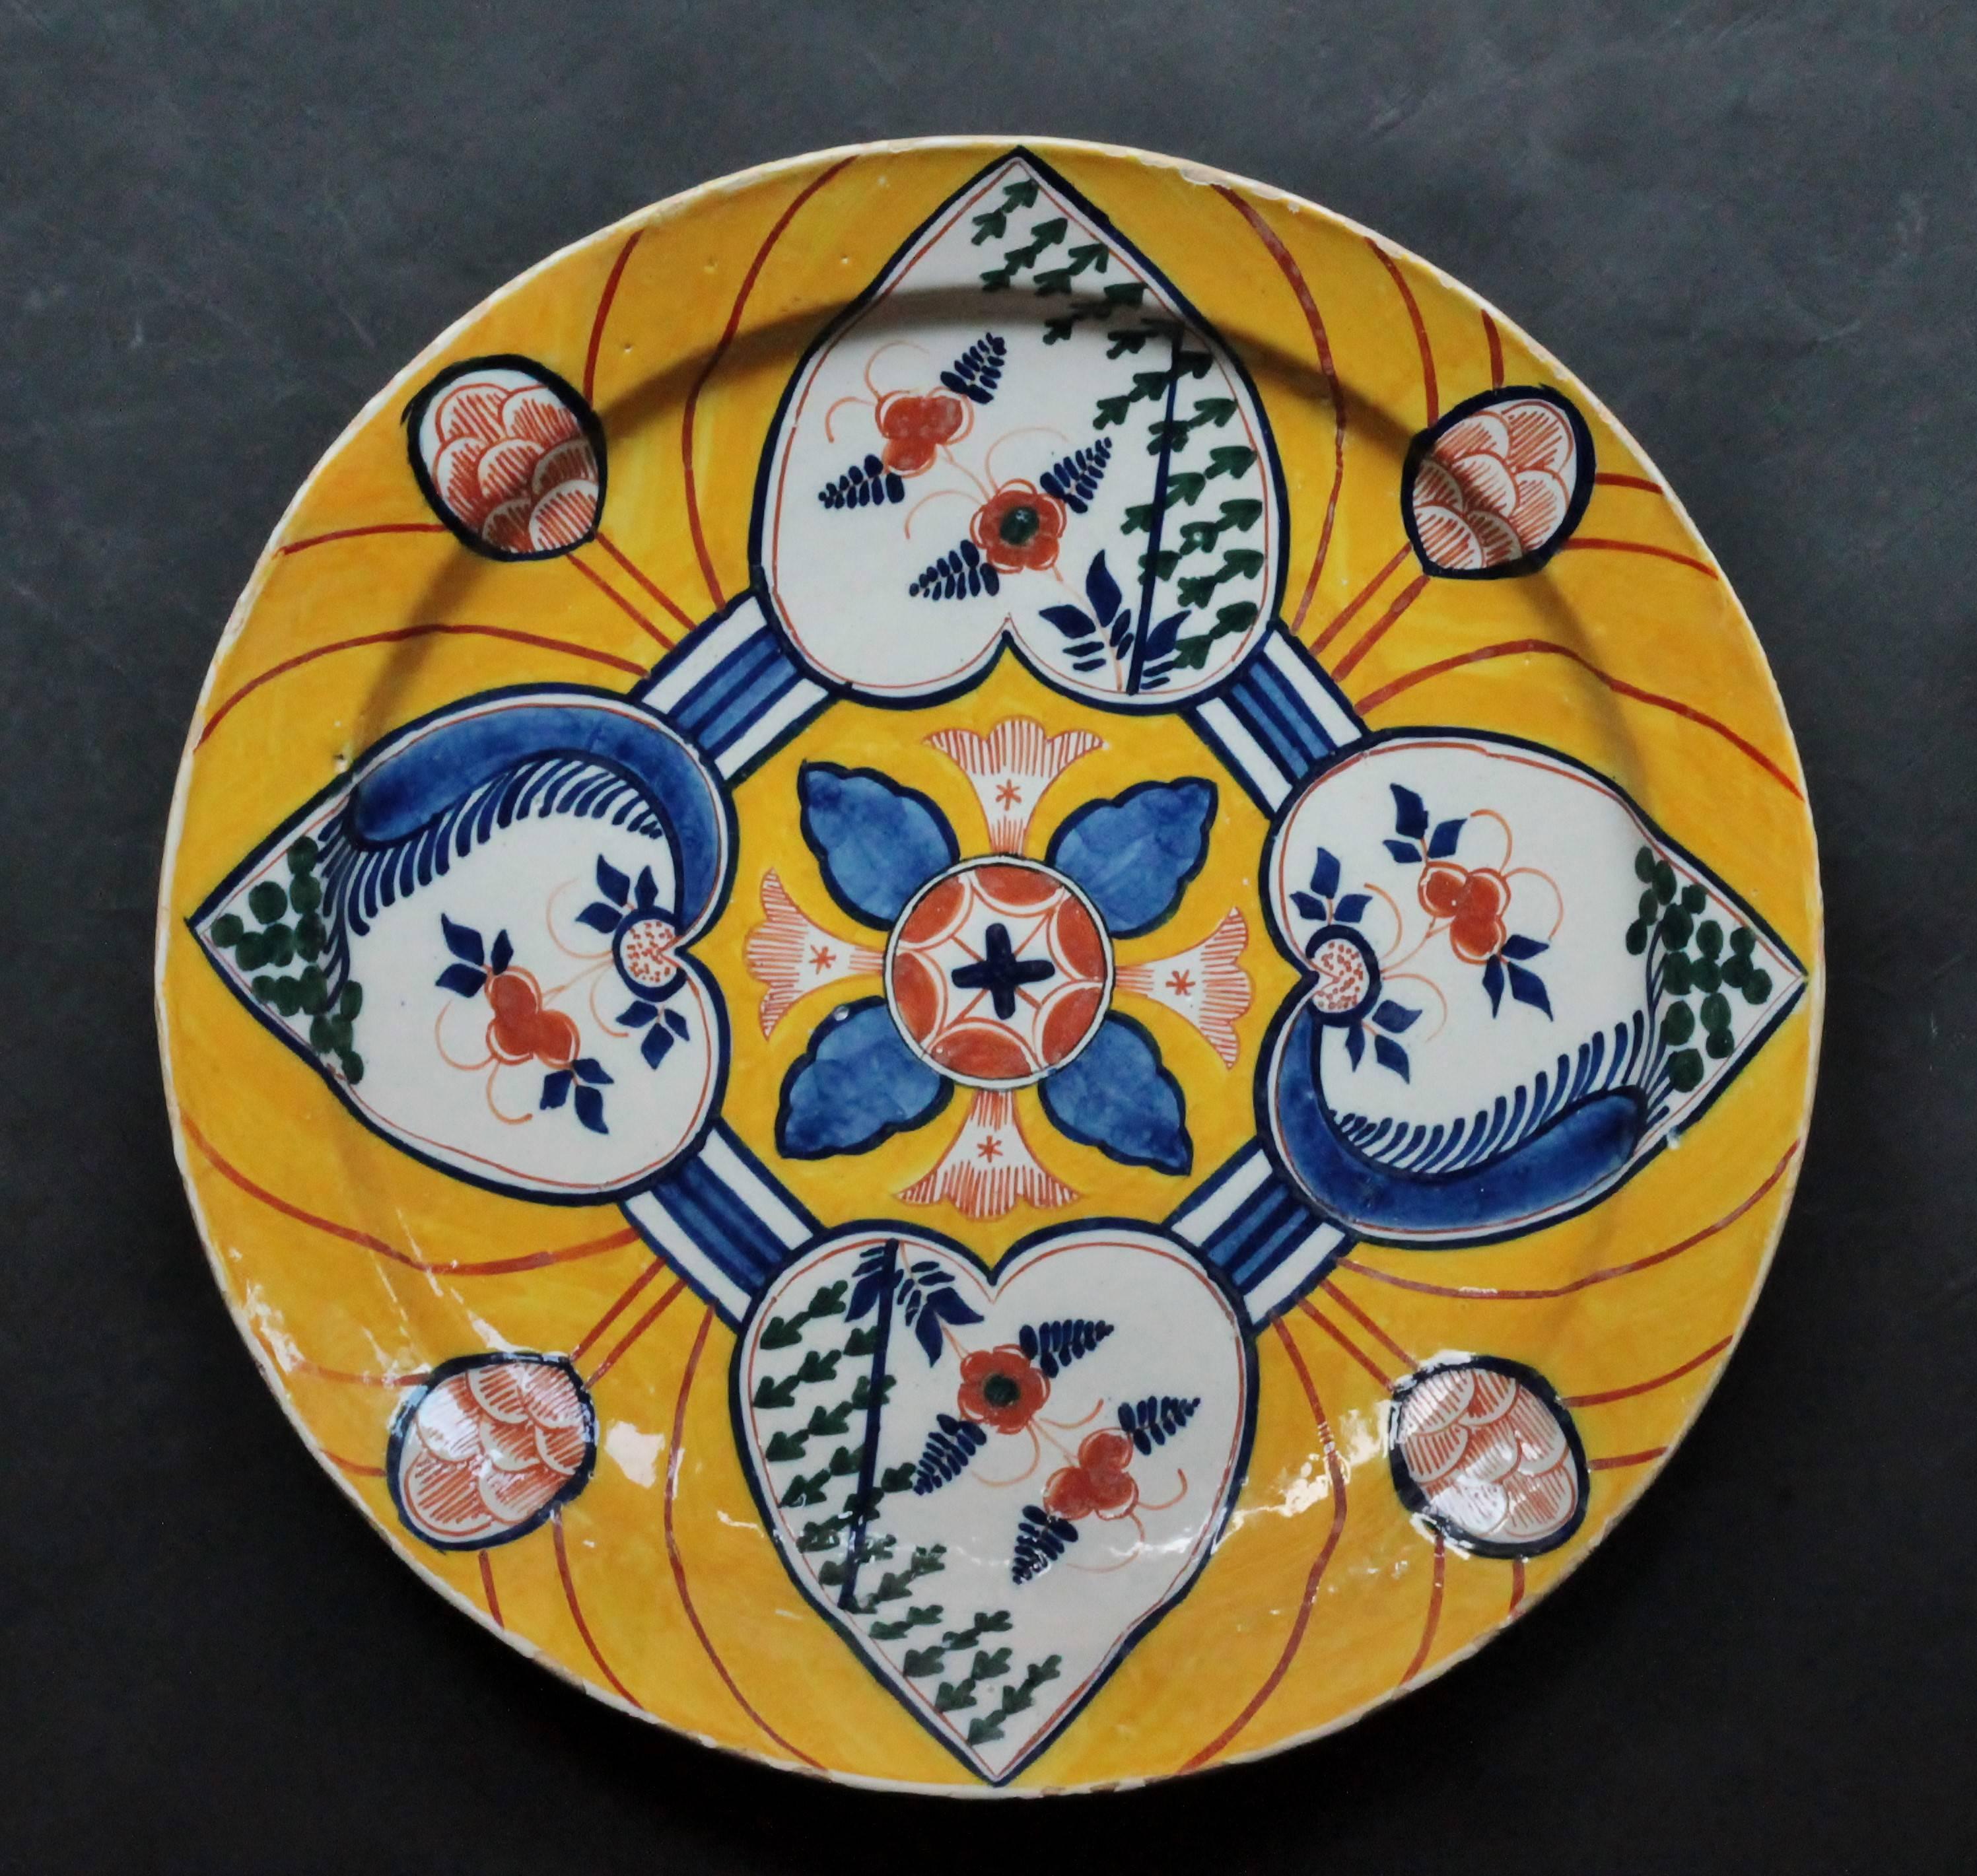 A Dutch Delft faience dish with a colors decoration says “four hearts” on a yellow background.
Undetermined mark in blue at the back. First half of the 18th century. Measures: D 36 cm., H 5.3 cm
A little piece restored on the rim and some minor